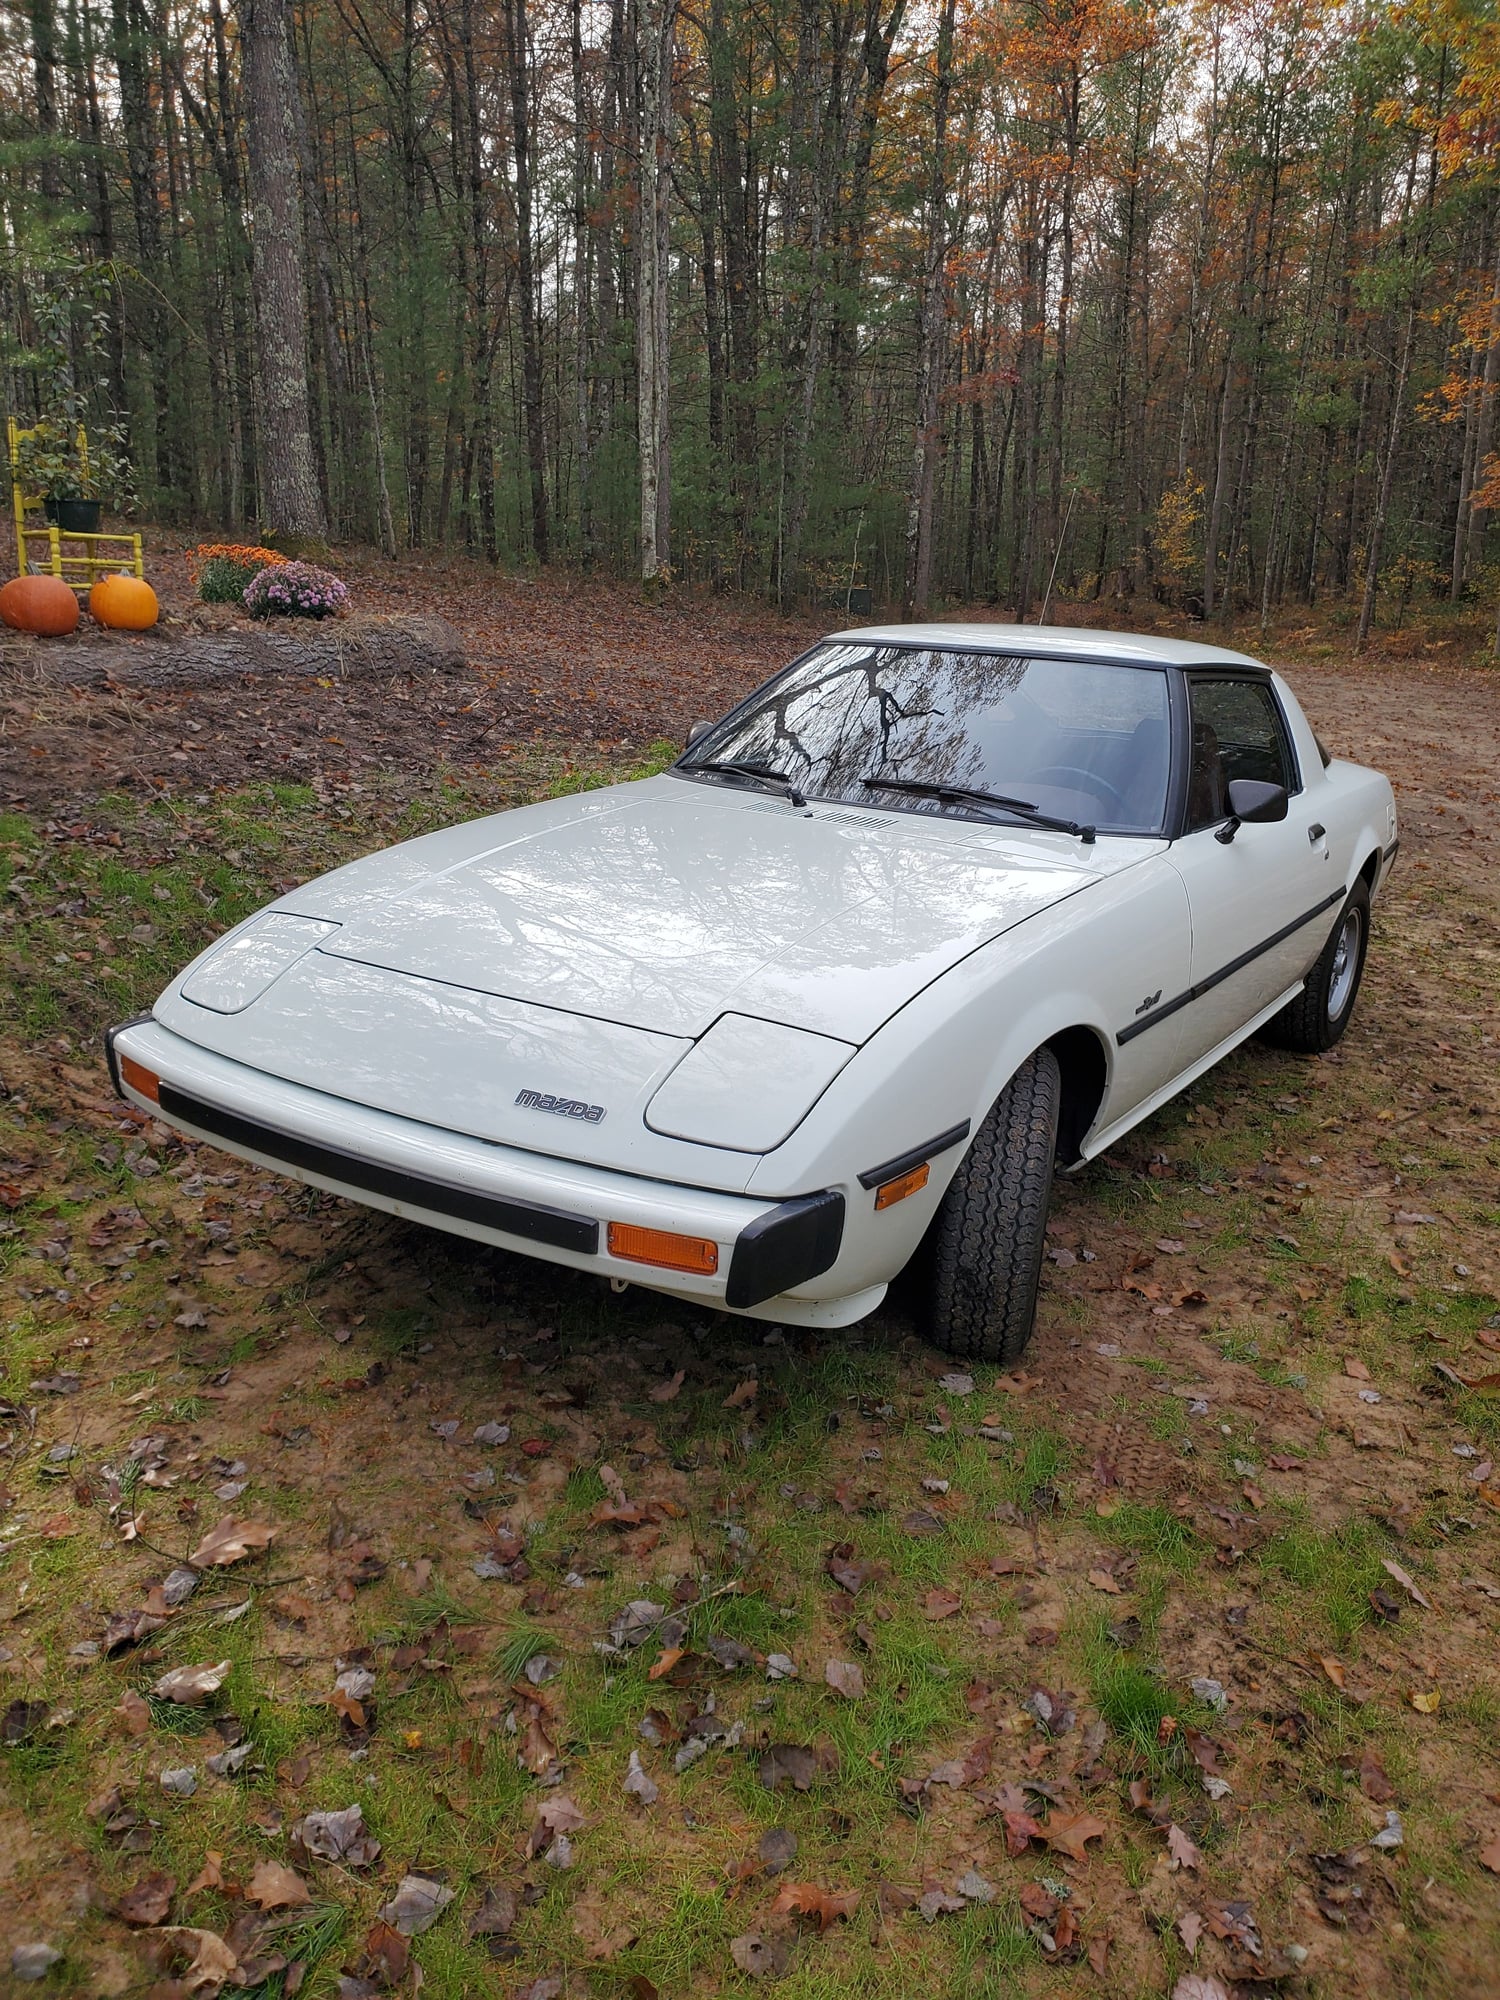 1979 Mazda RX-7 - One Owner - Used - VIN SA22C510770 - 71,800 Miles - Other - 2WD - Manual - Hatchback - White - Irons, MI 49644, United States